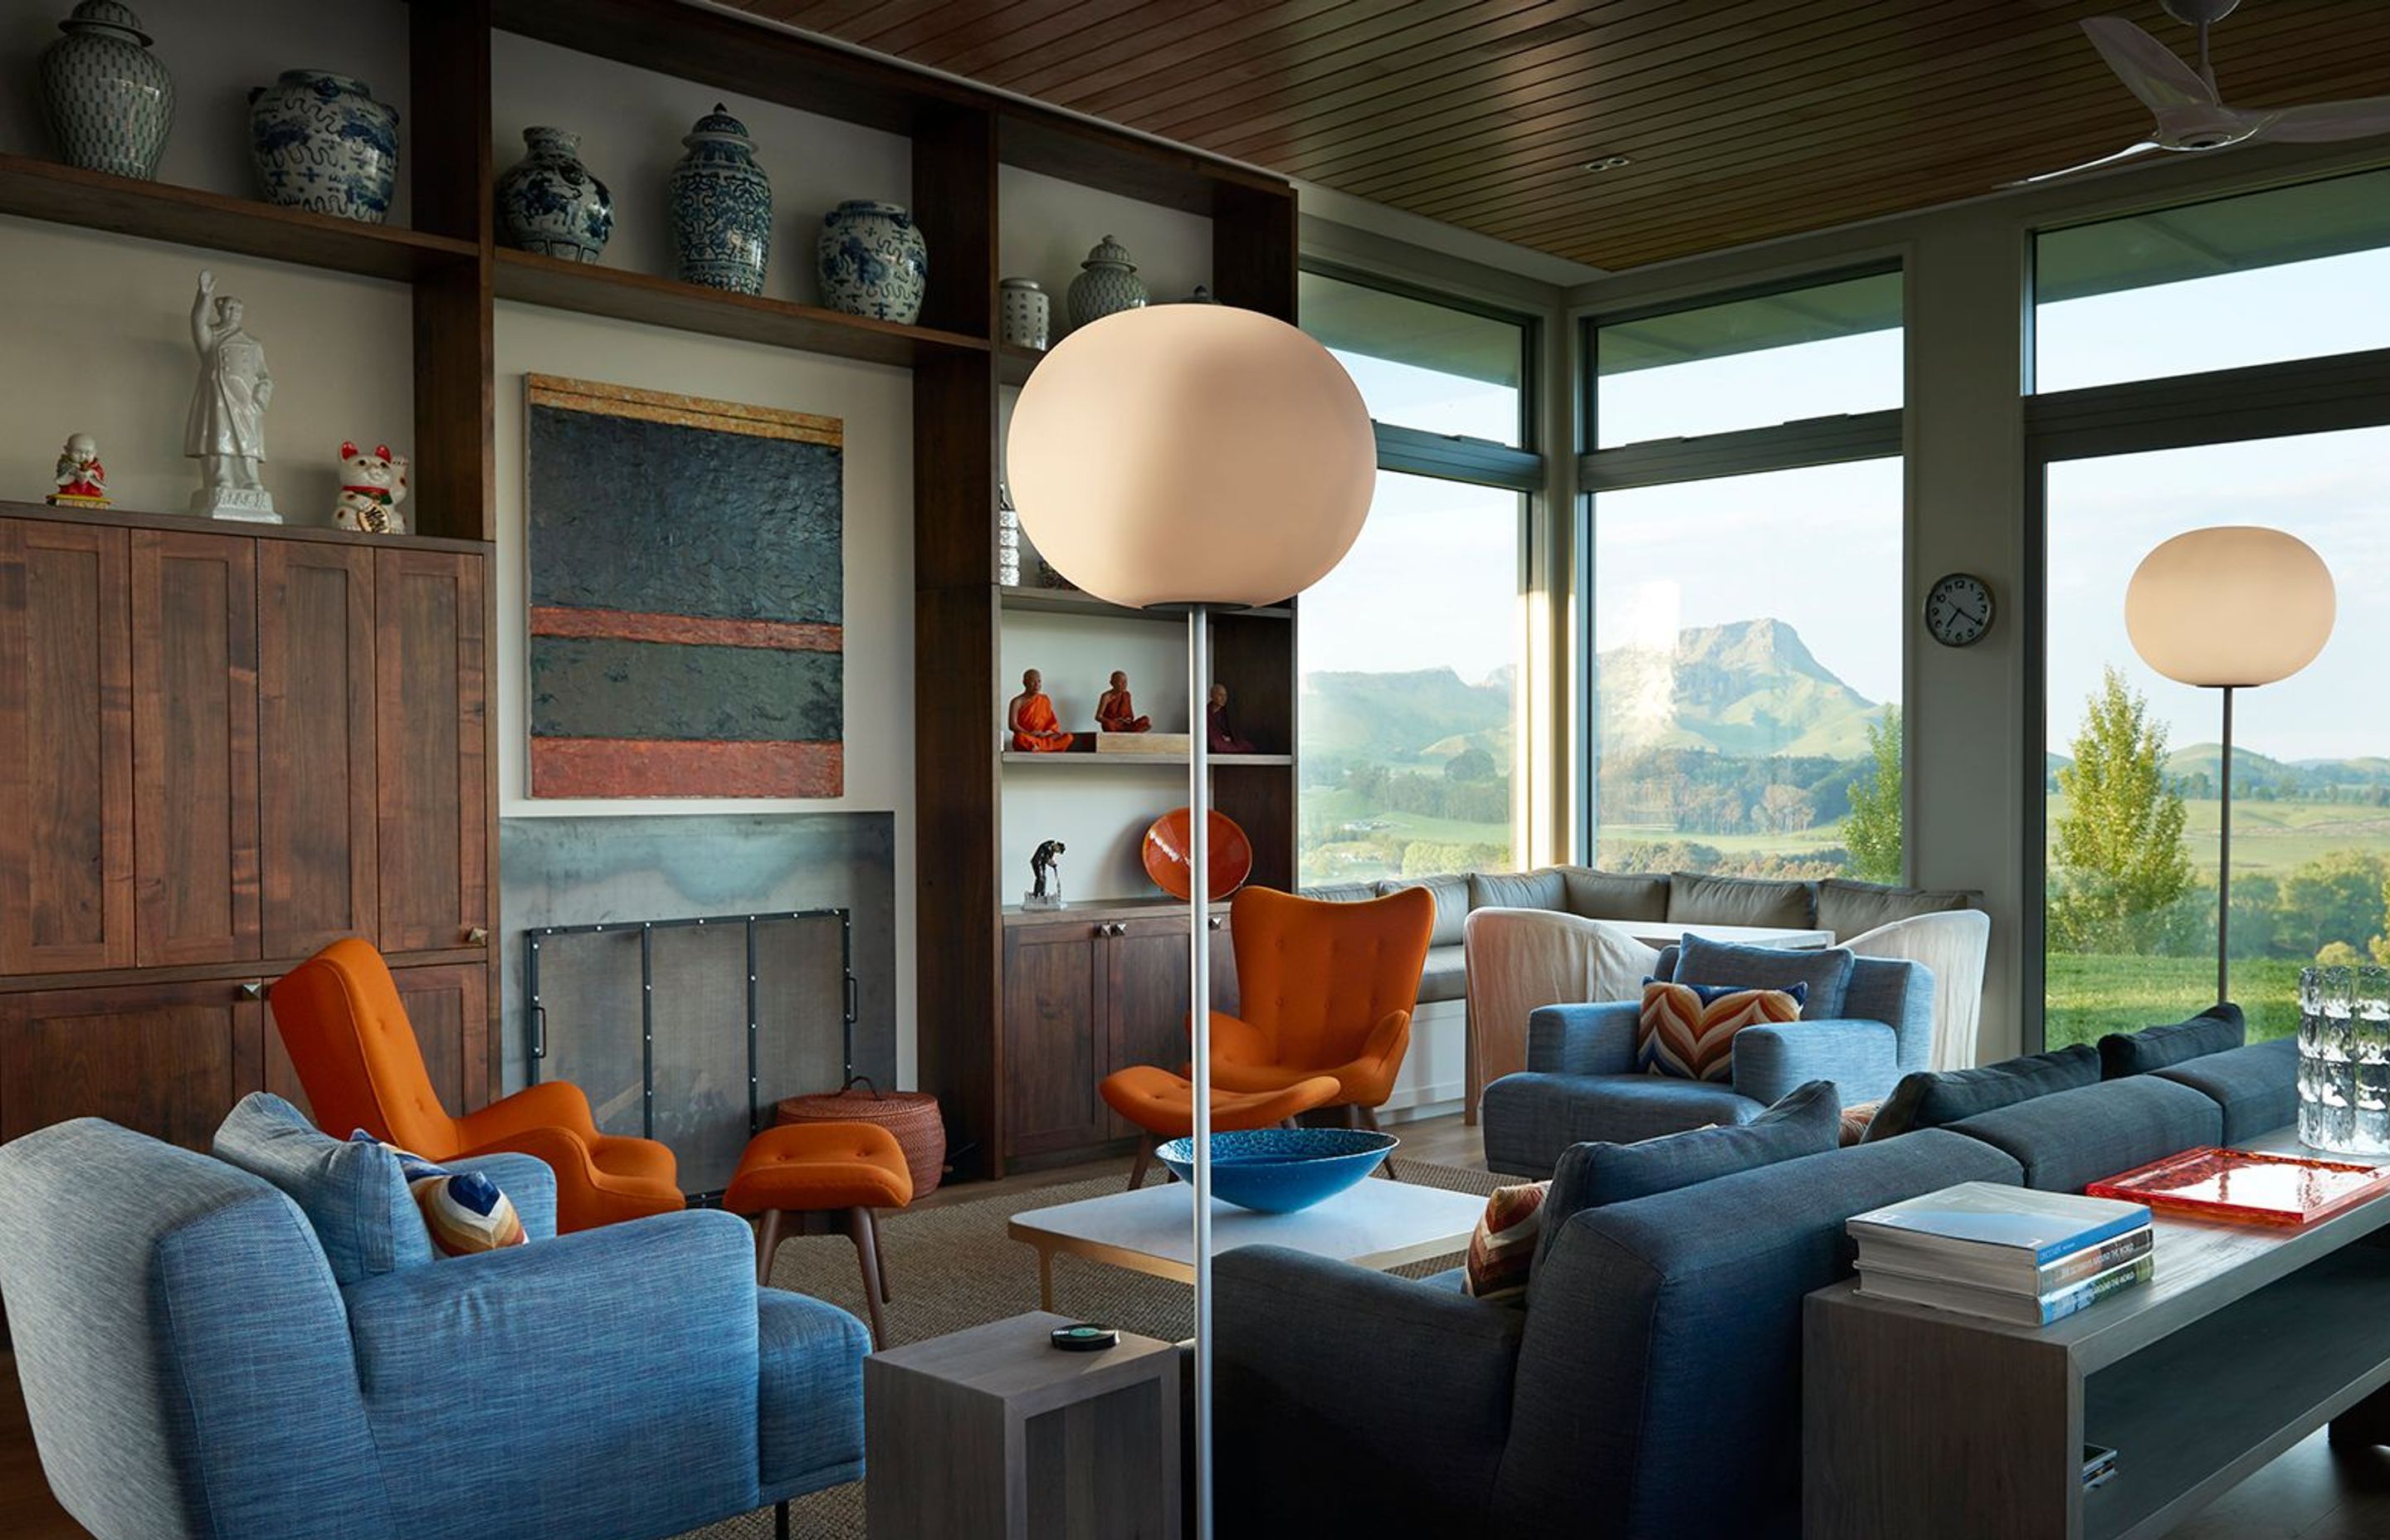 The colourful blue-and-orange lounge area enjoys a direct view out towards the statuesque Te Mata Peak.